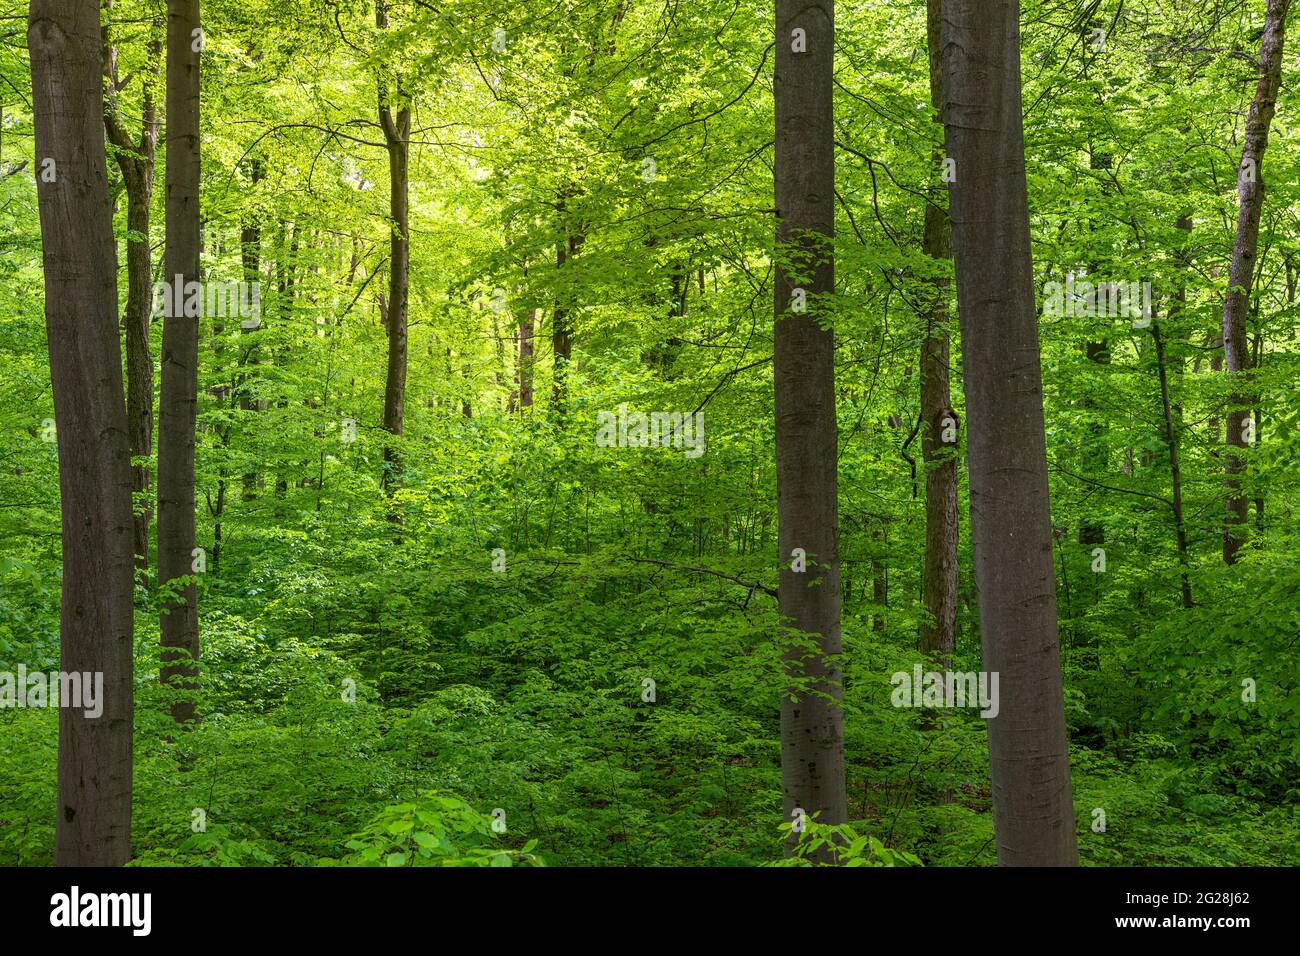 Woodland in Hainich National Park, Thuringia, Germany Stock Photo